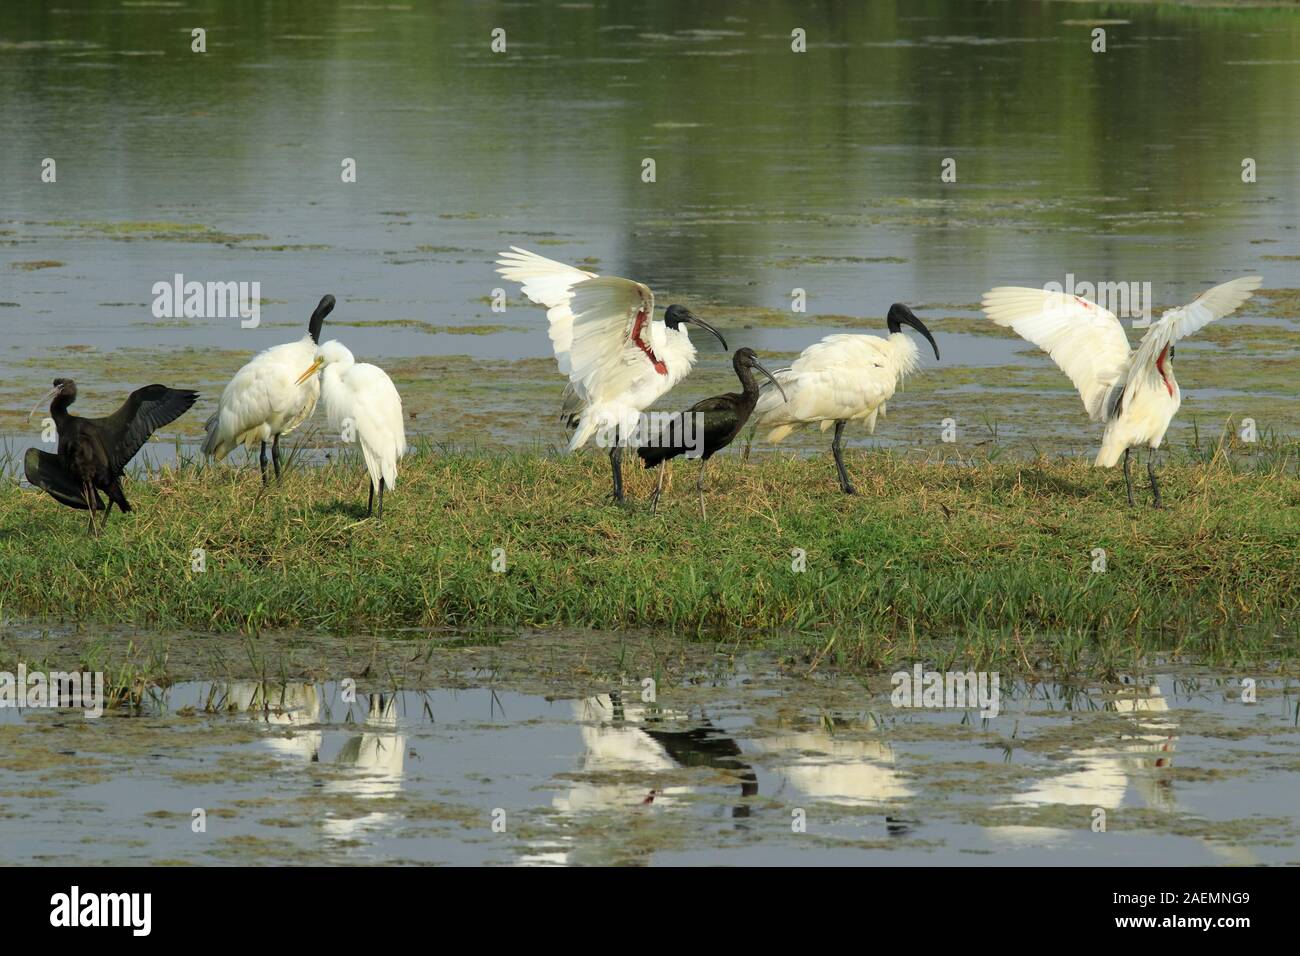 Ibis in keoladeo national Park in India Stock Photo